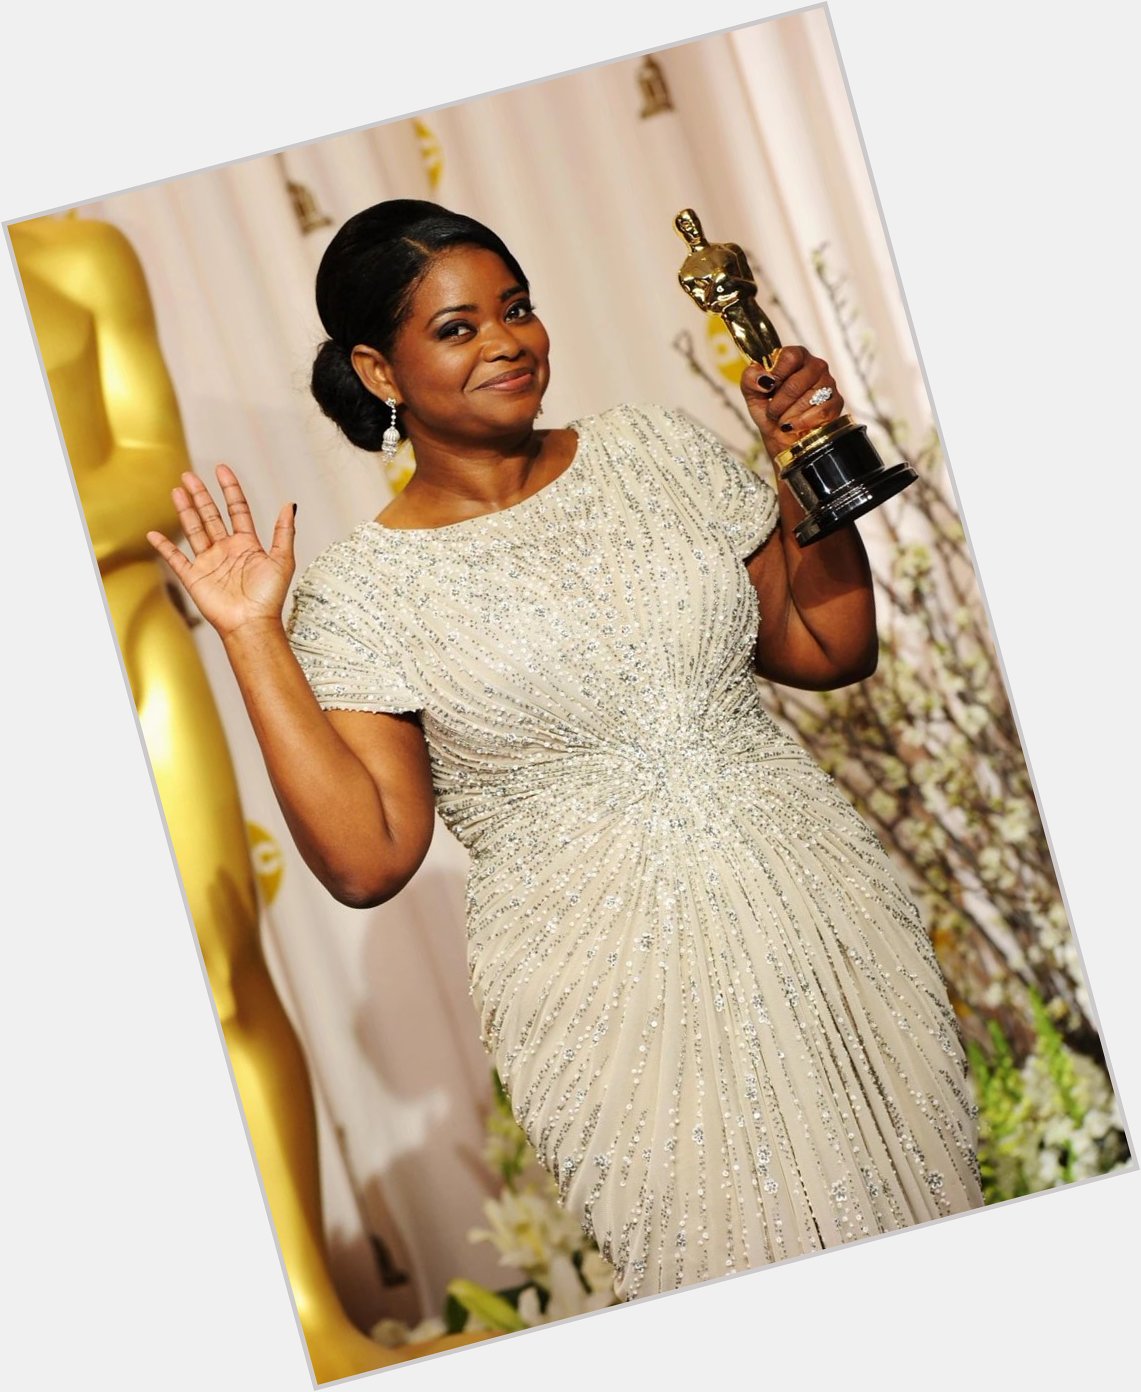 Happy Belated Birthday to one of my favorite actresses Octavia Spencer! She is incredible in every roll she plays! 